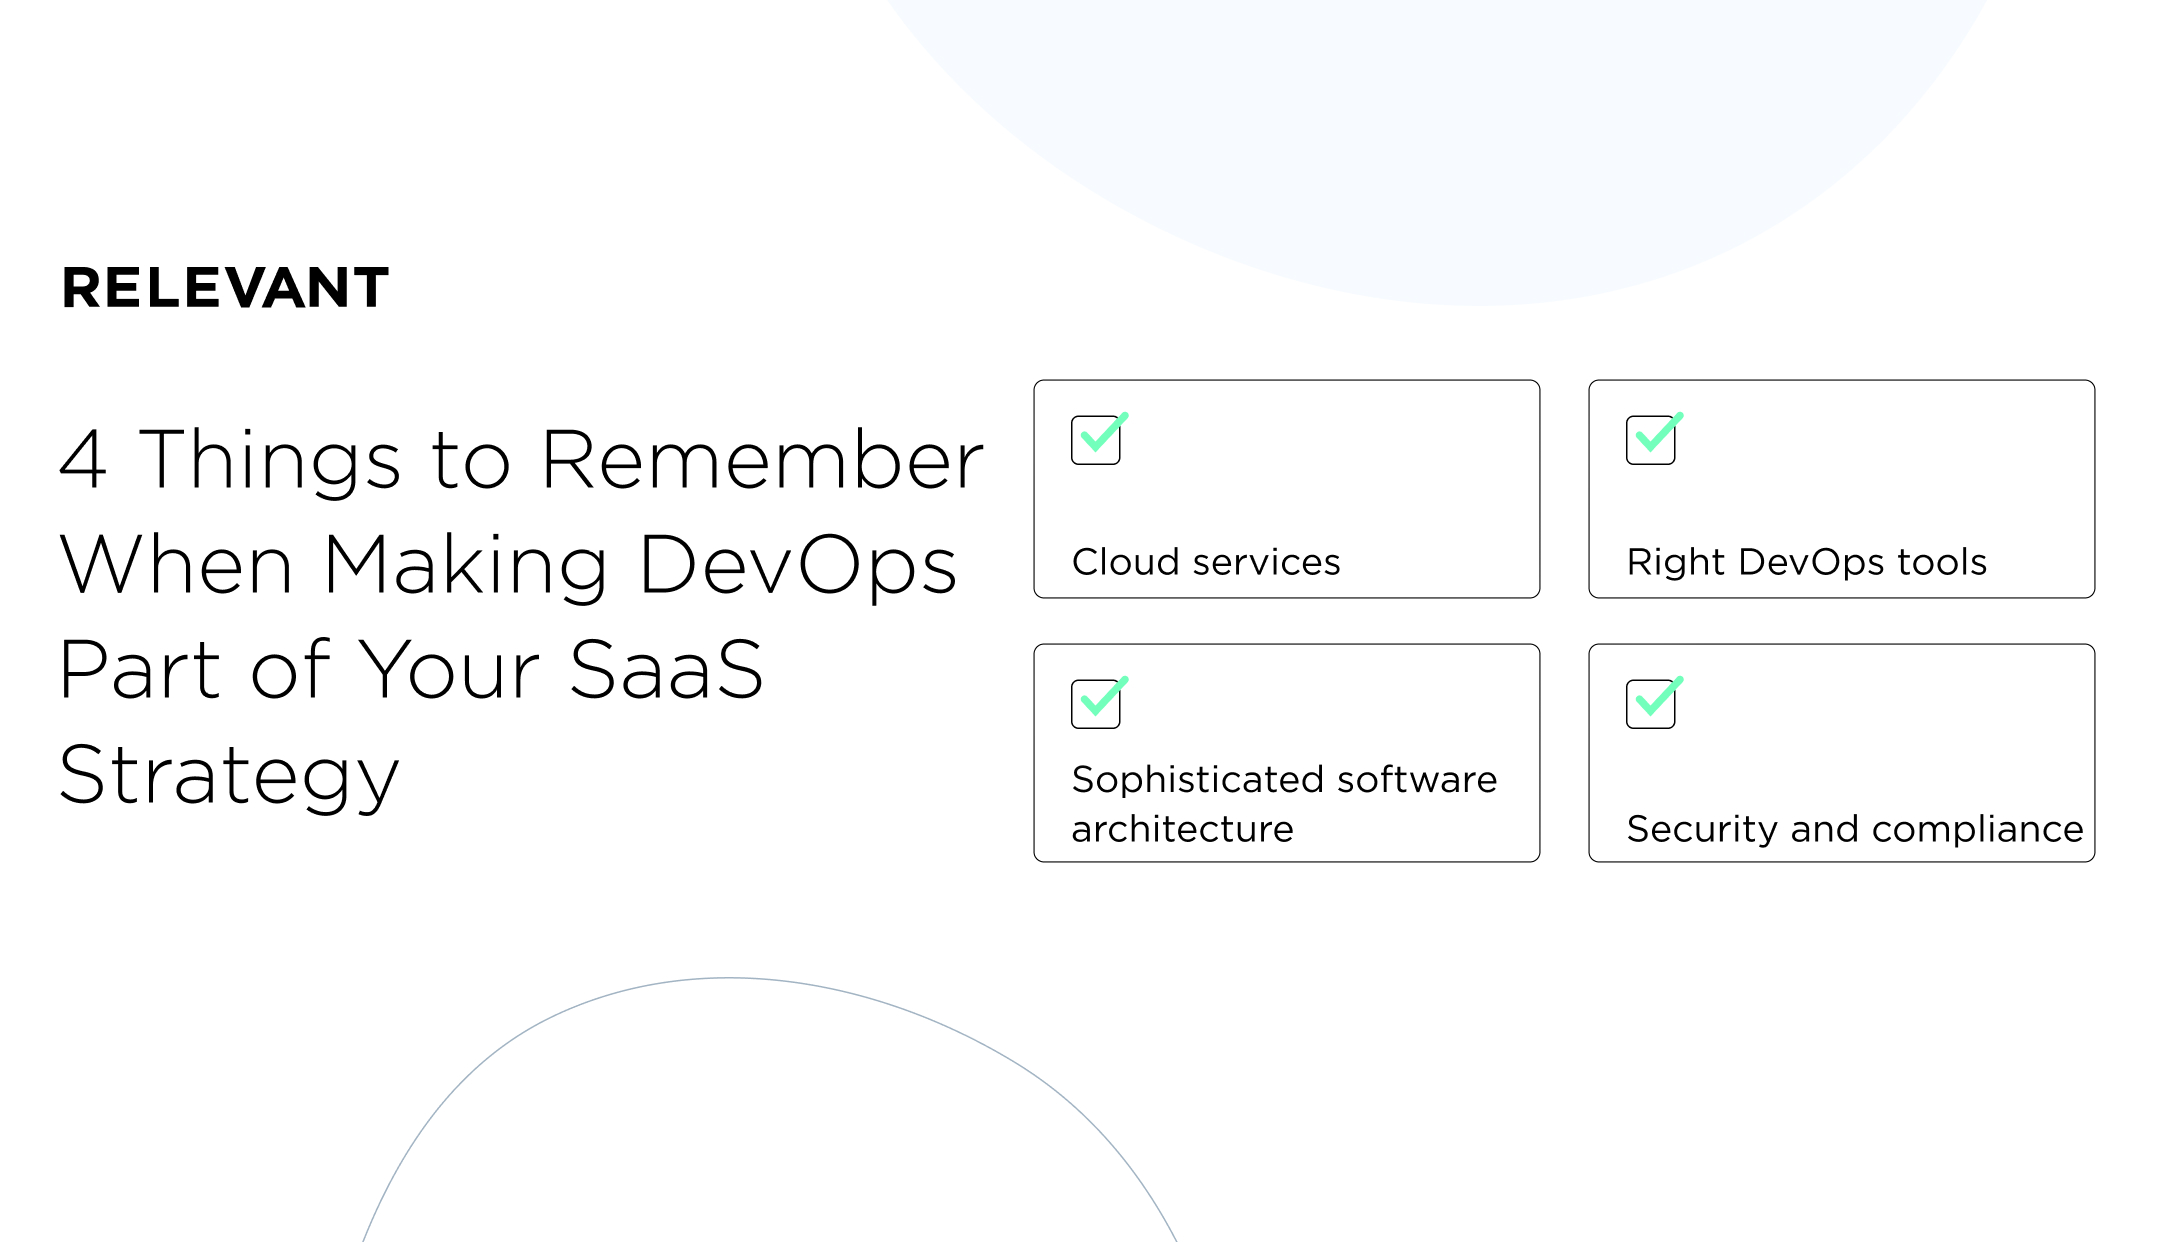 4 Things to Remember When Making DevOps Part of Your SaaS Strategy